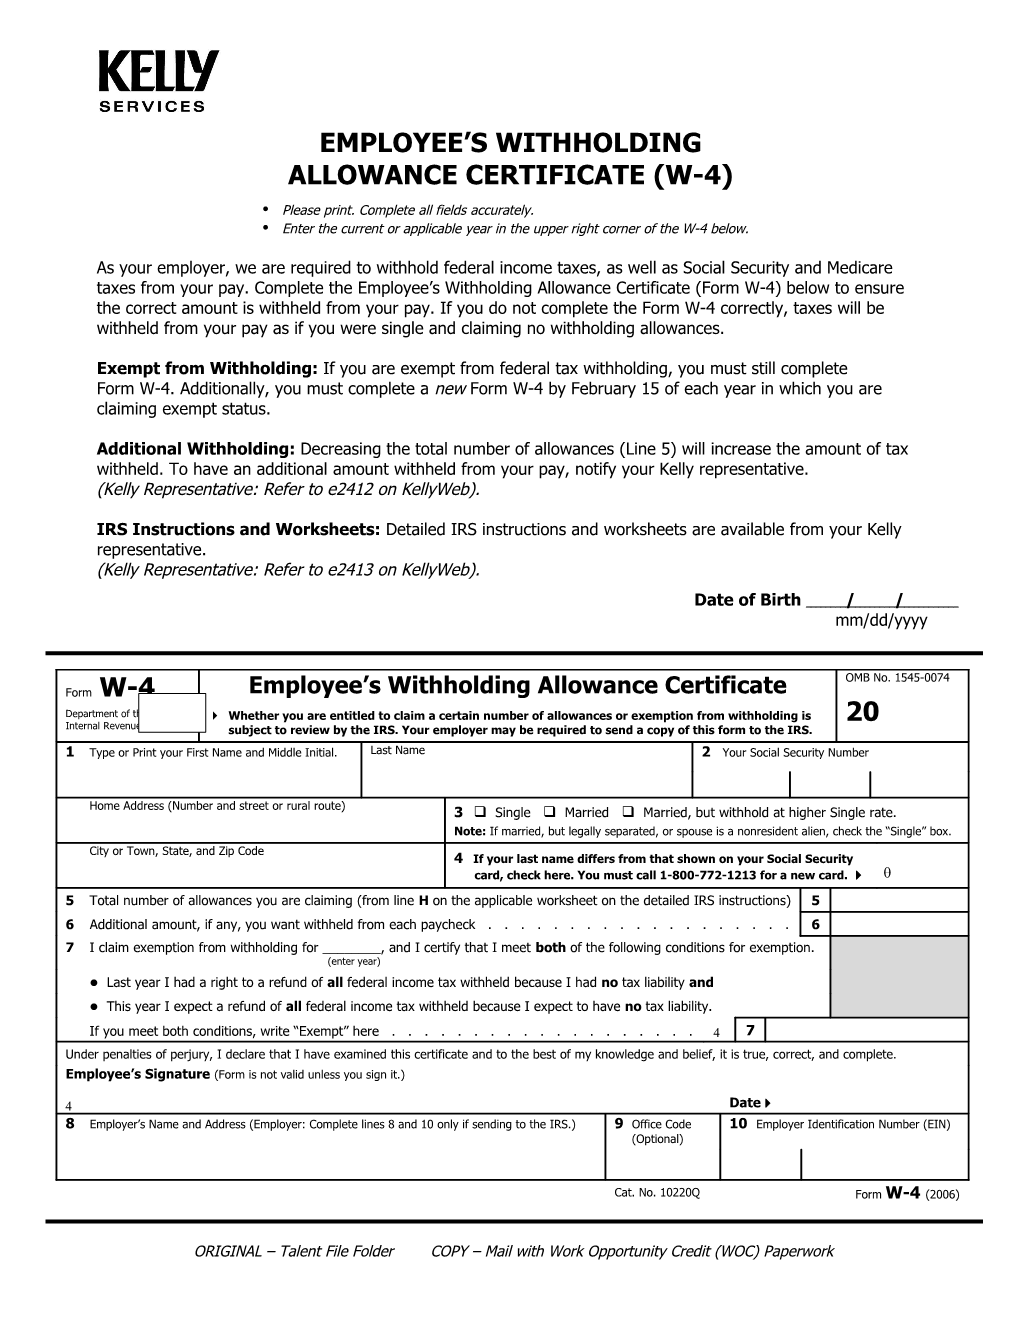 Employee's Withholding Allowance Certificate (W-4) (E4864)